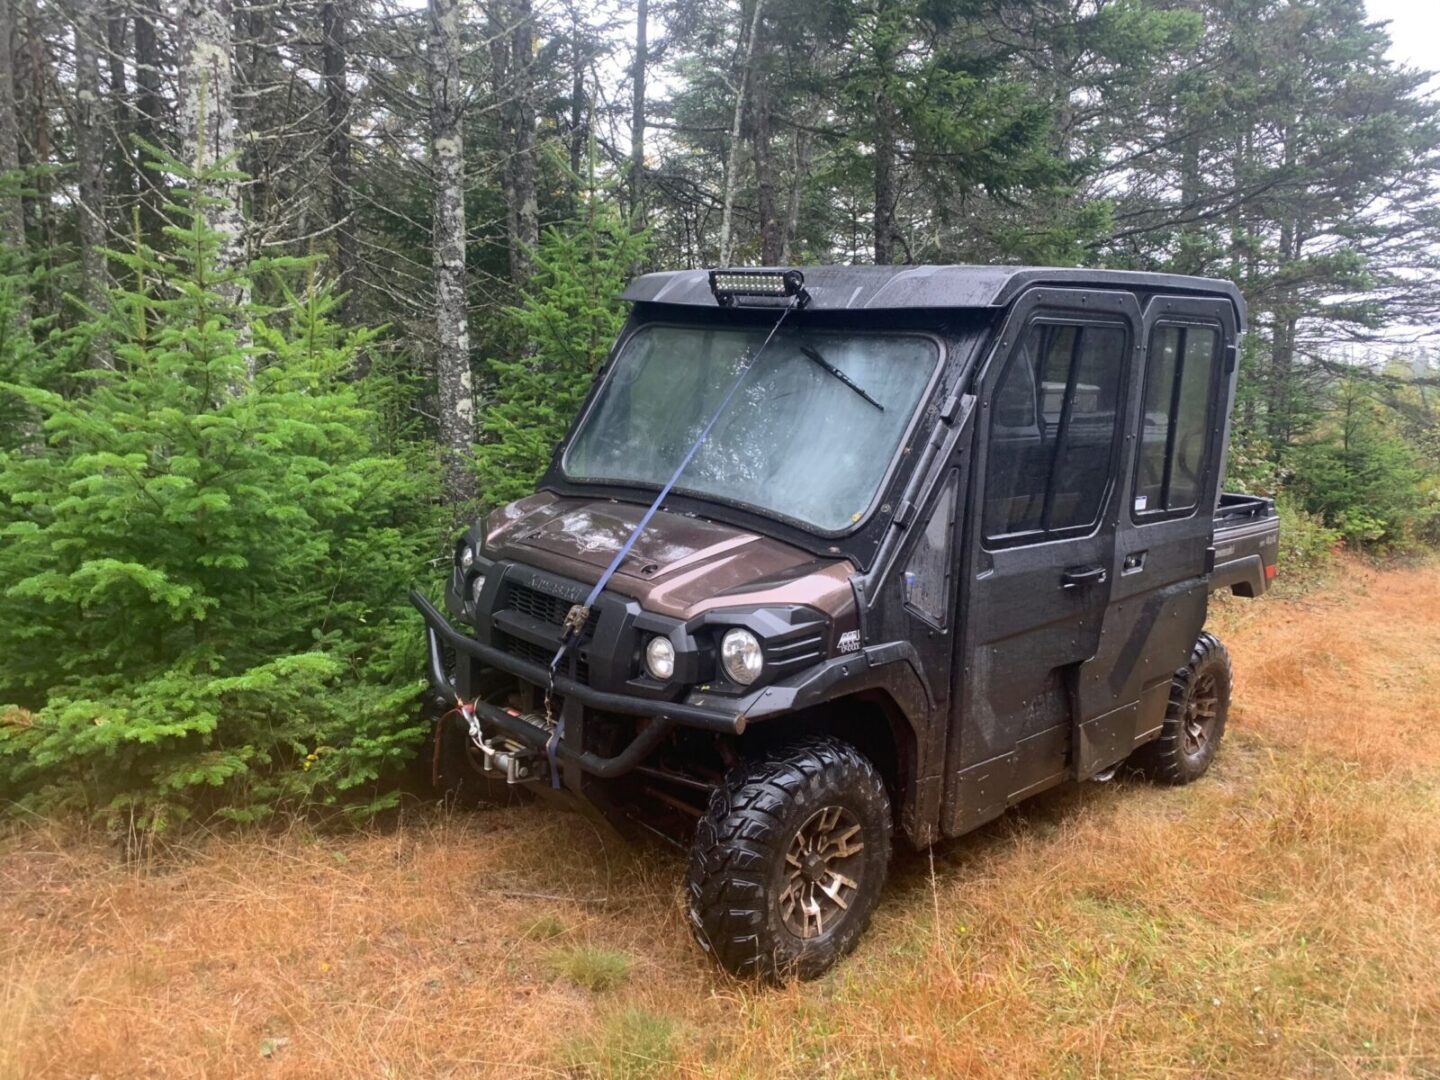 A mule utility vehicle parked in the woods.